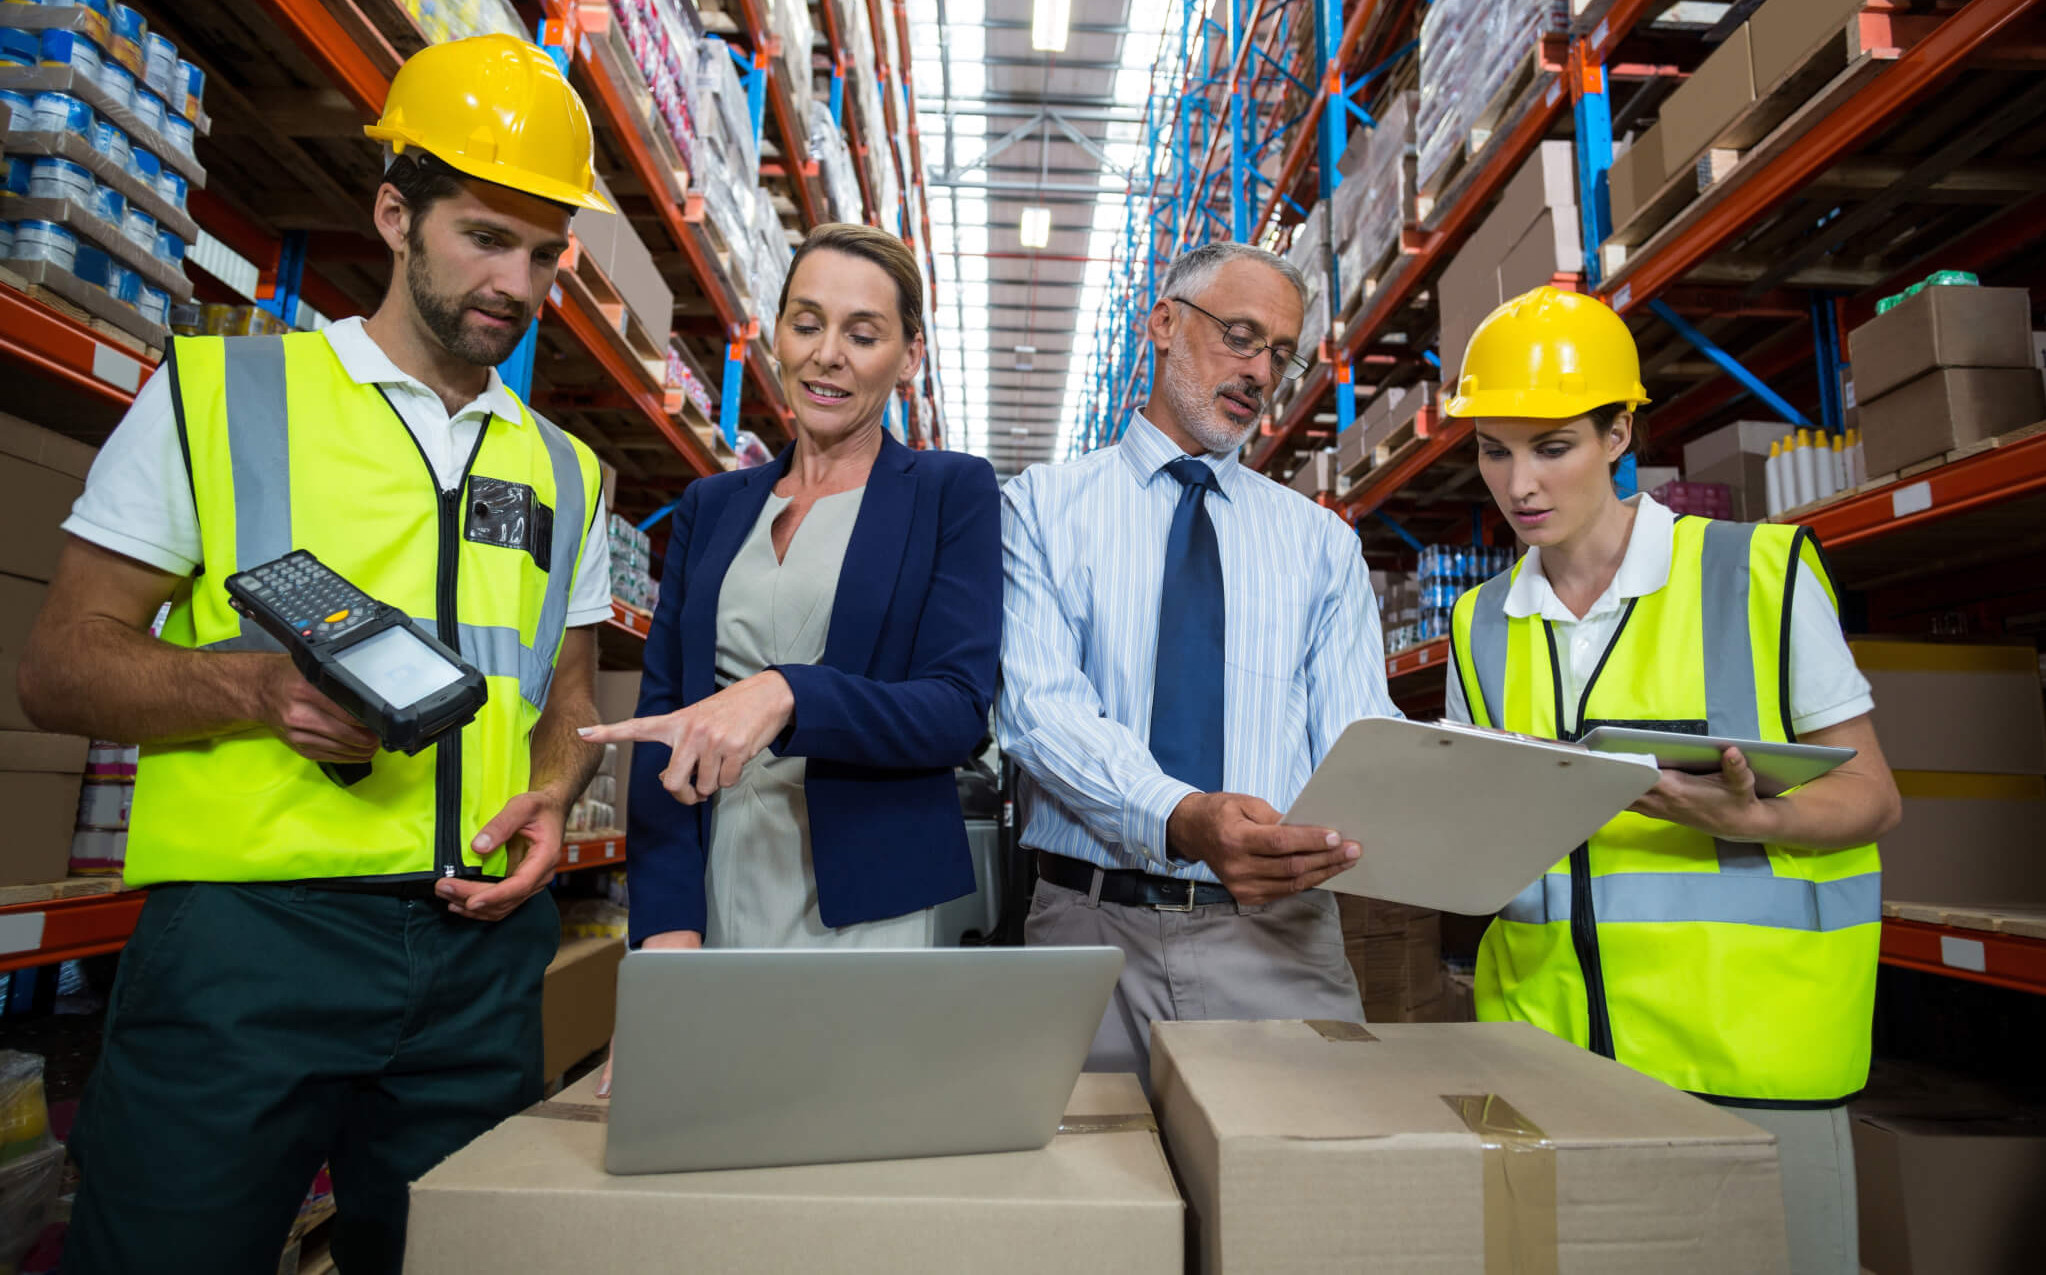 How 3PL Warehouses Can Win More Business with a WMS